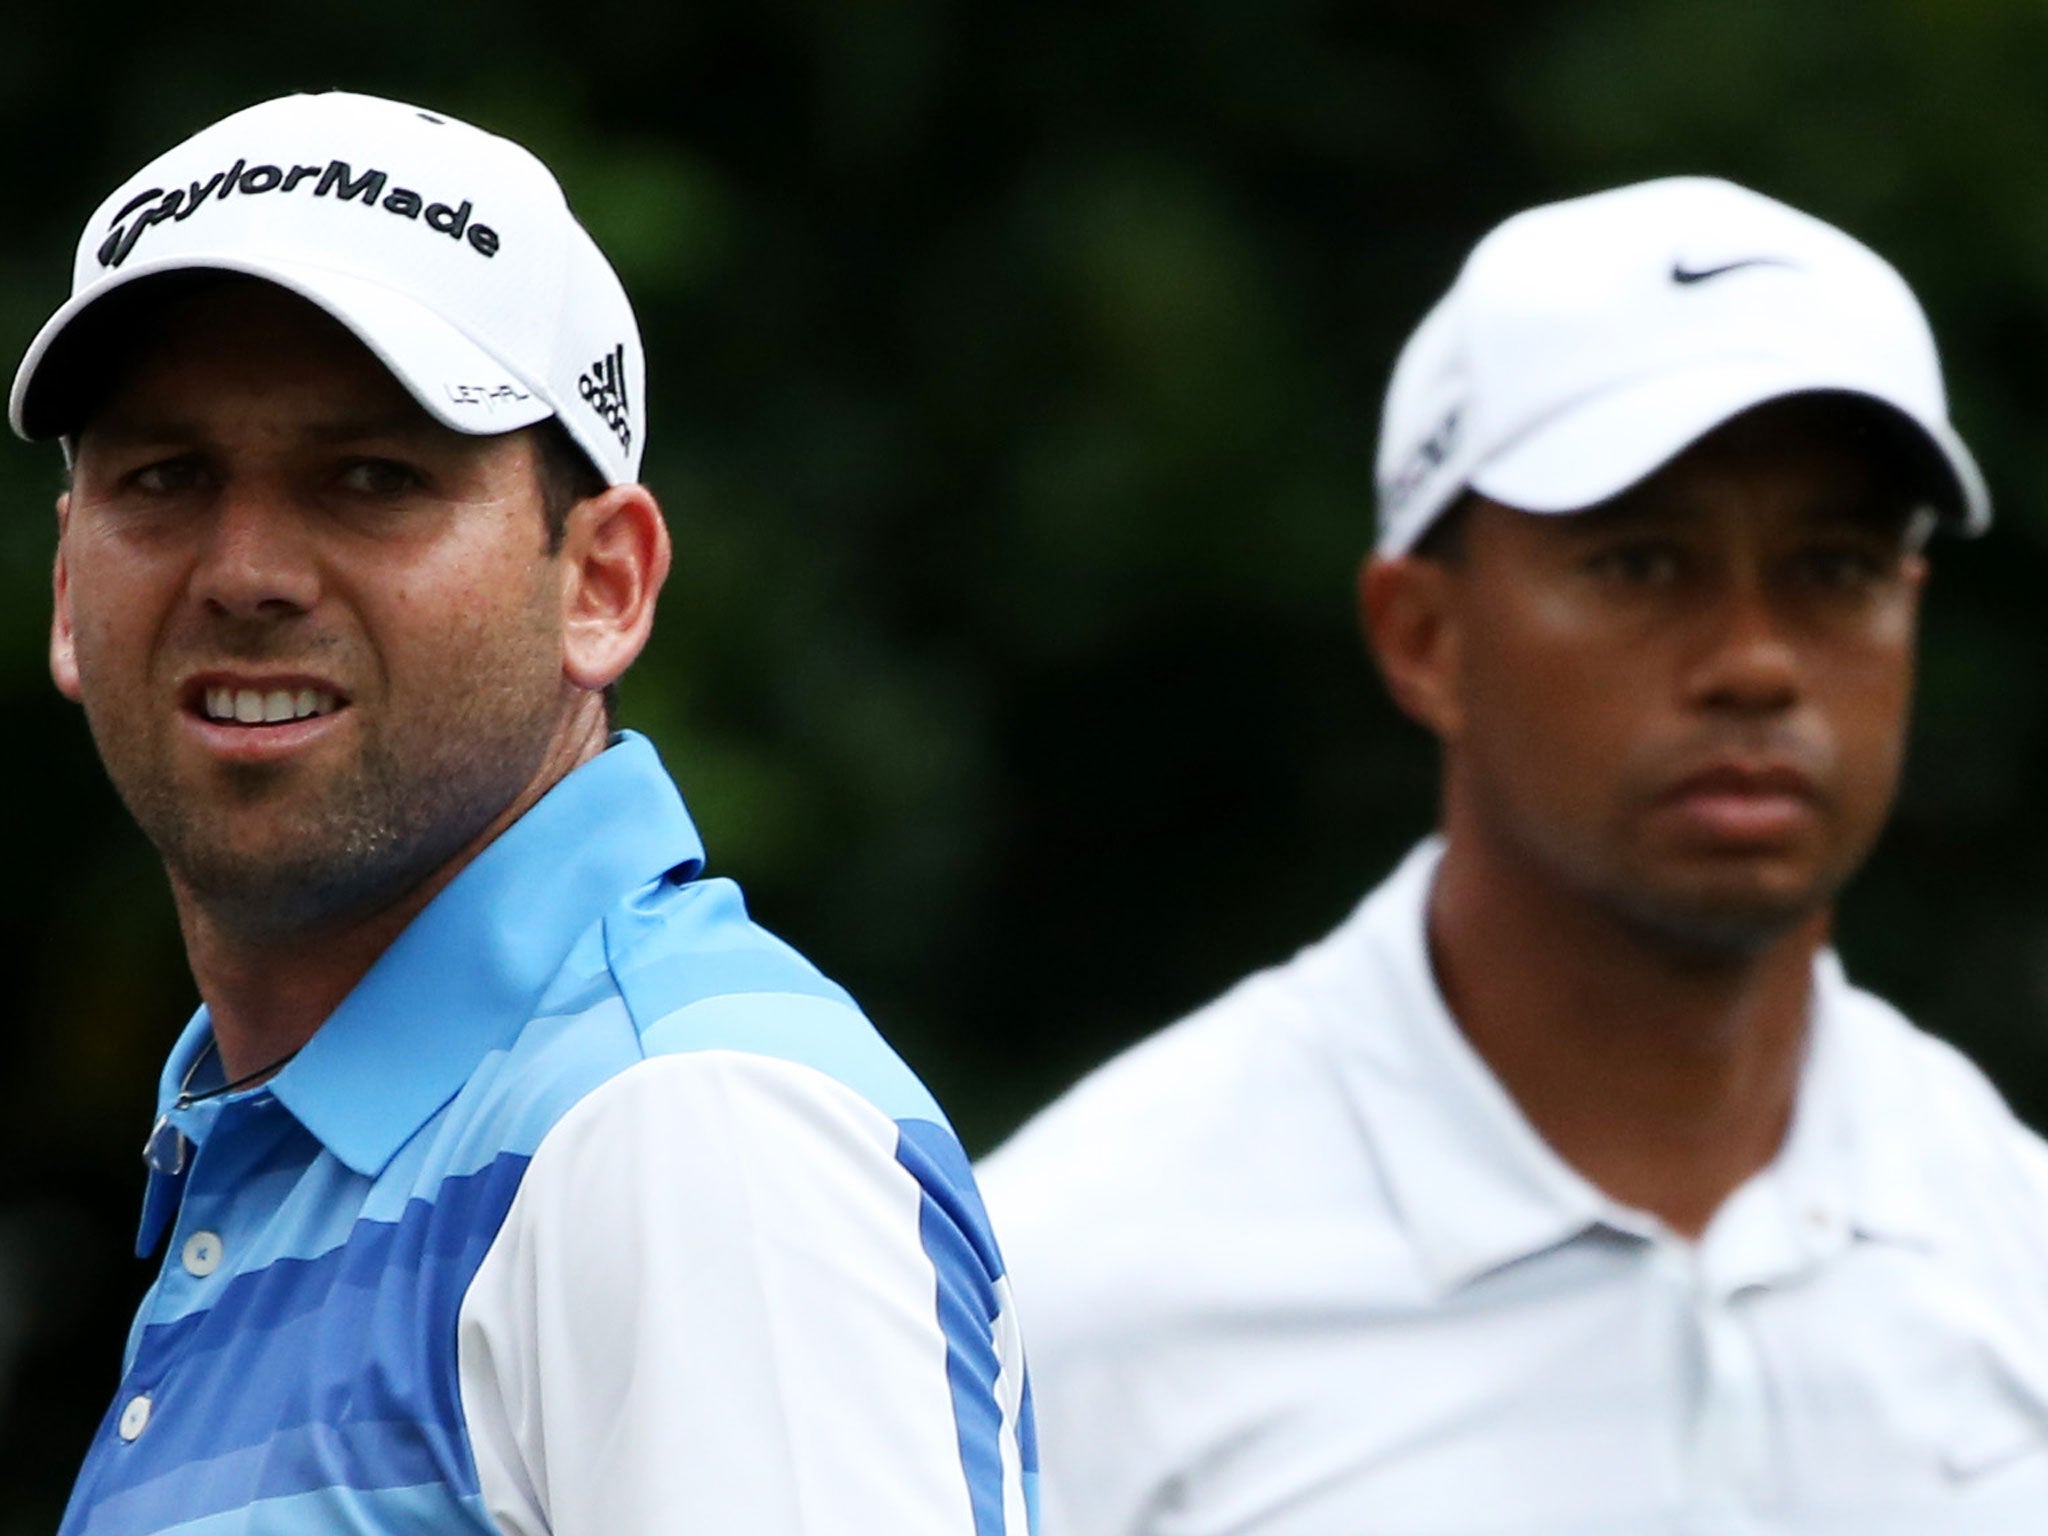 Sergio Garcia, left, and Tiger Woods, right, have clashed over the years